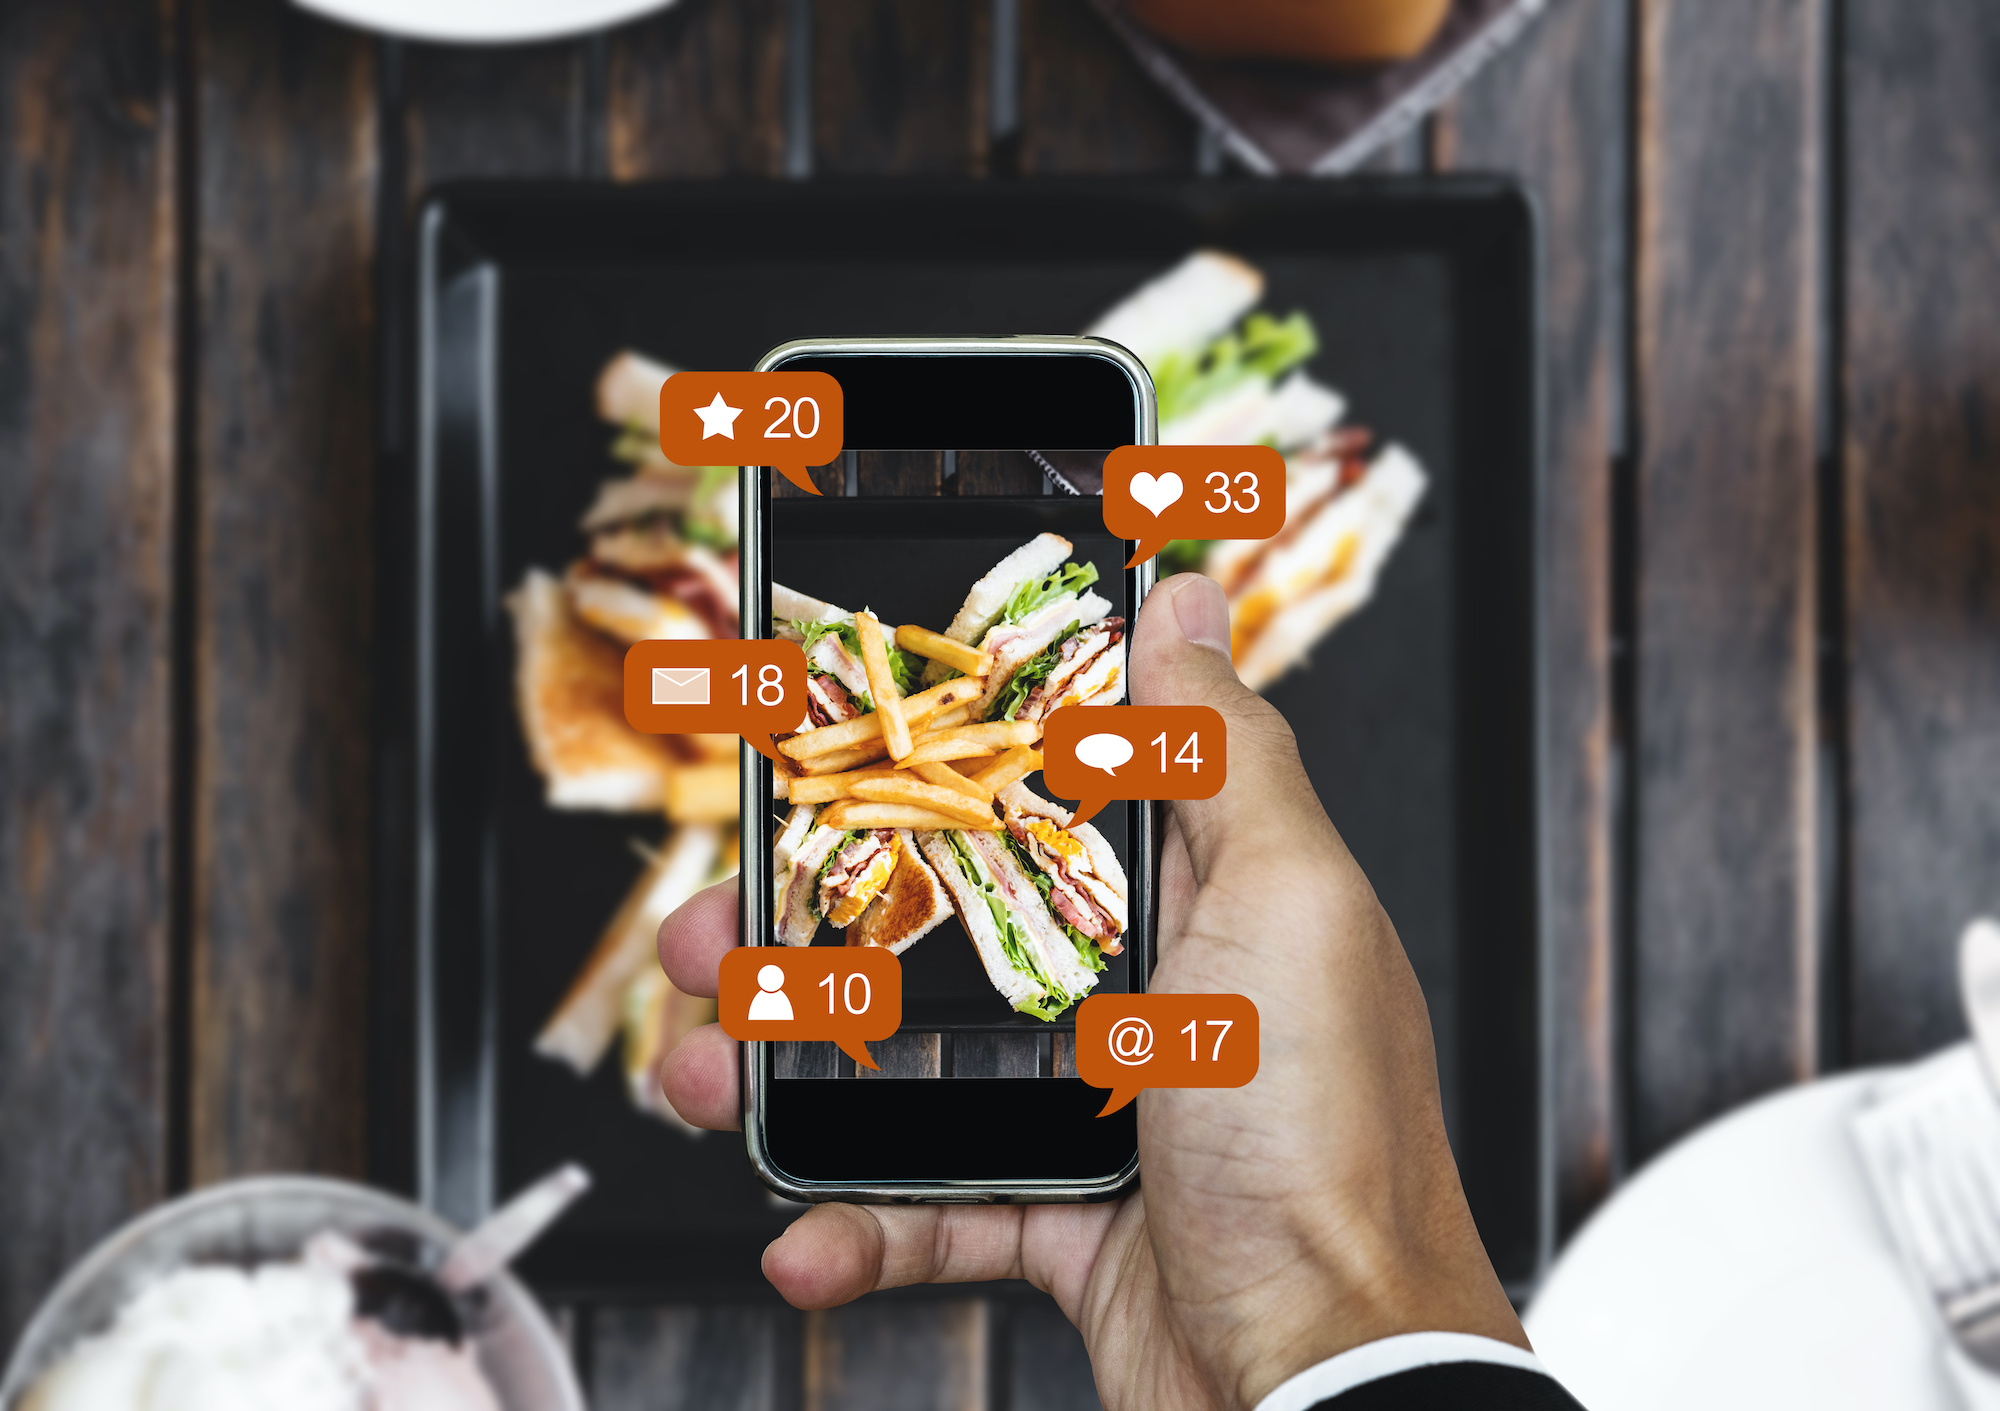 Taking food photograph by mobile smart phone, and sharing on social media, social network with notification icons; blog: Tips for Marketing Your Restaurant on Social Media